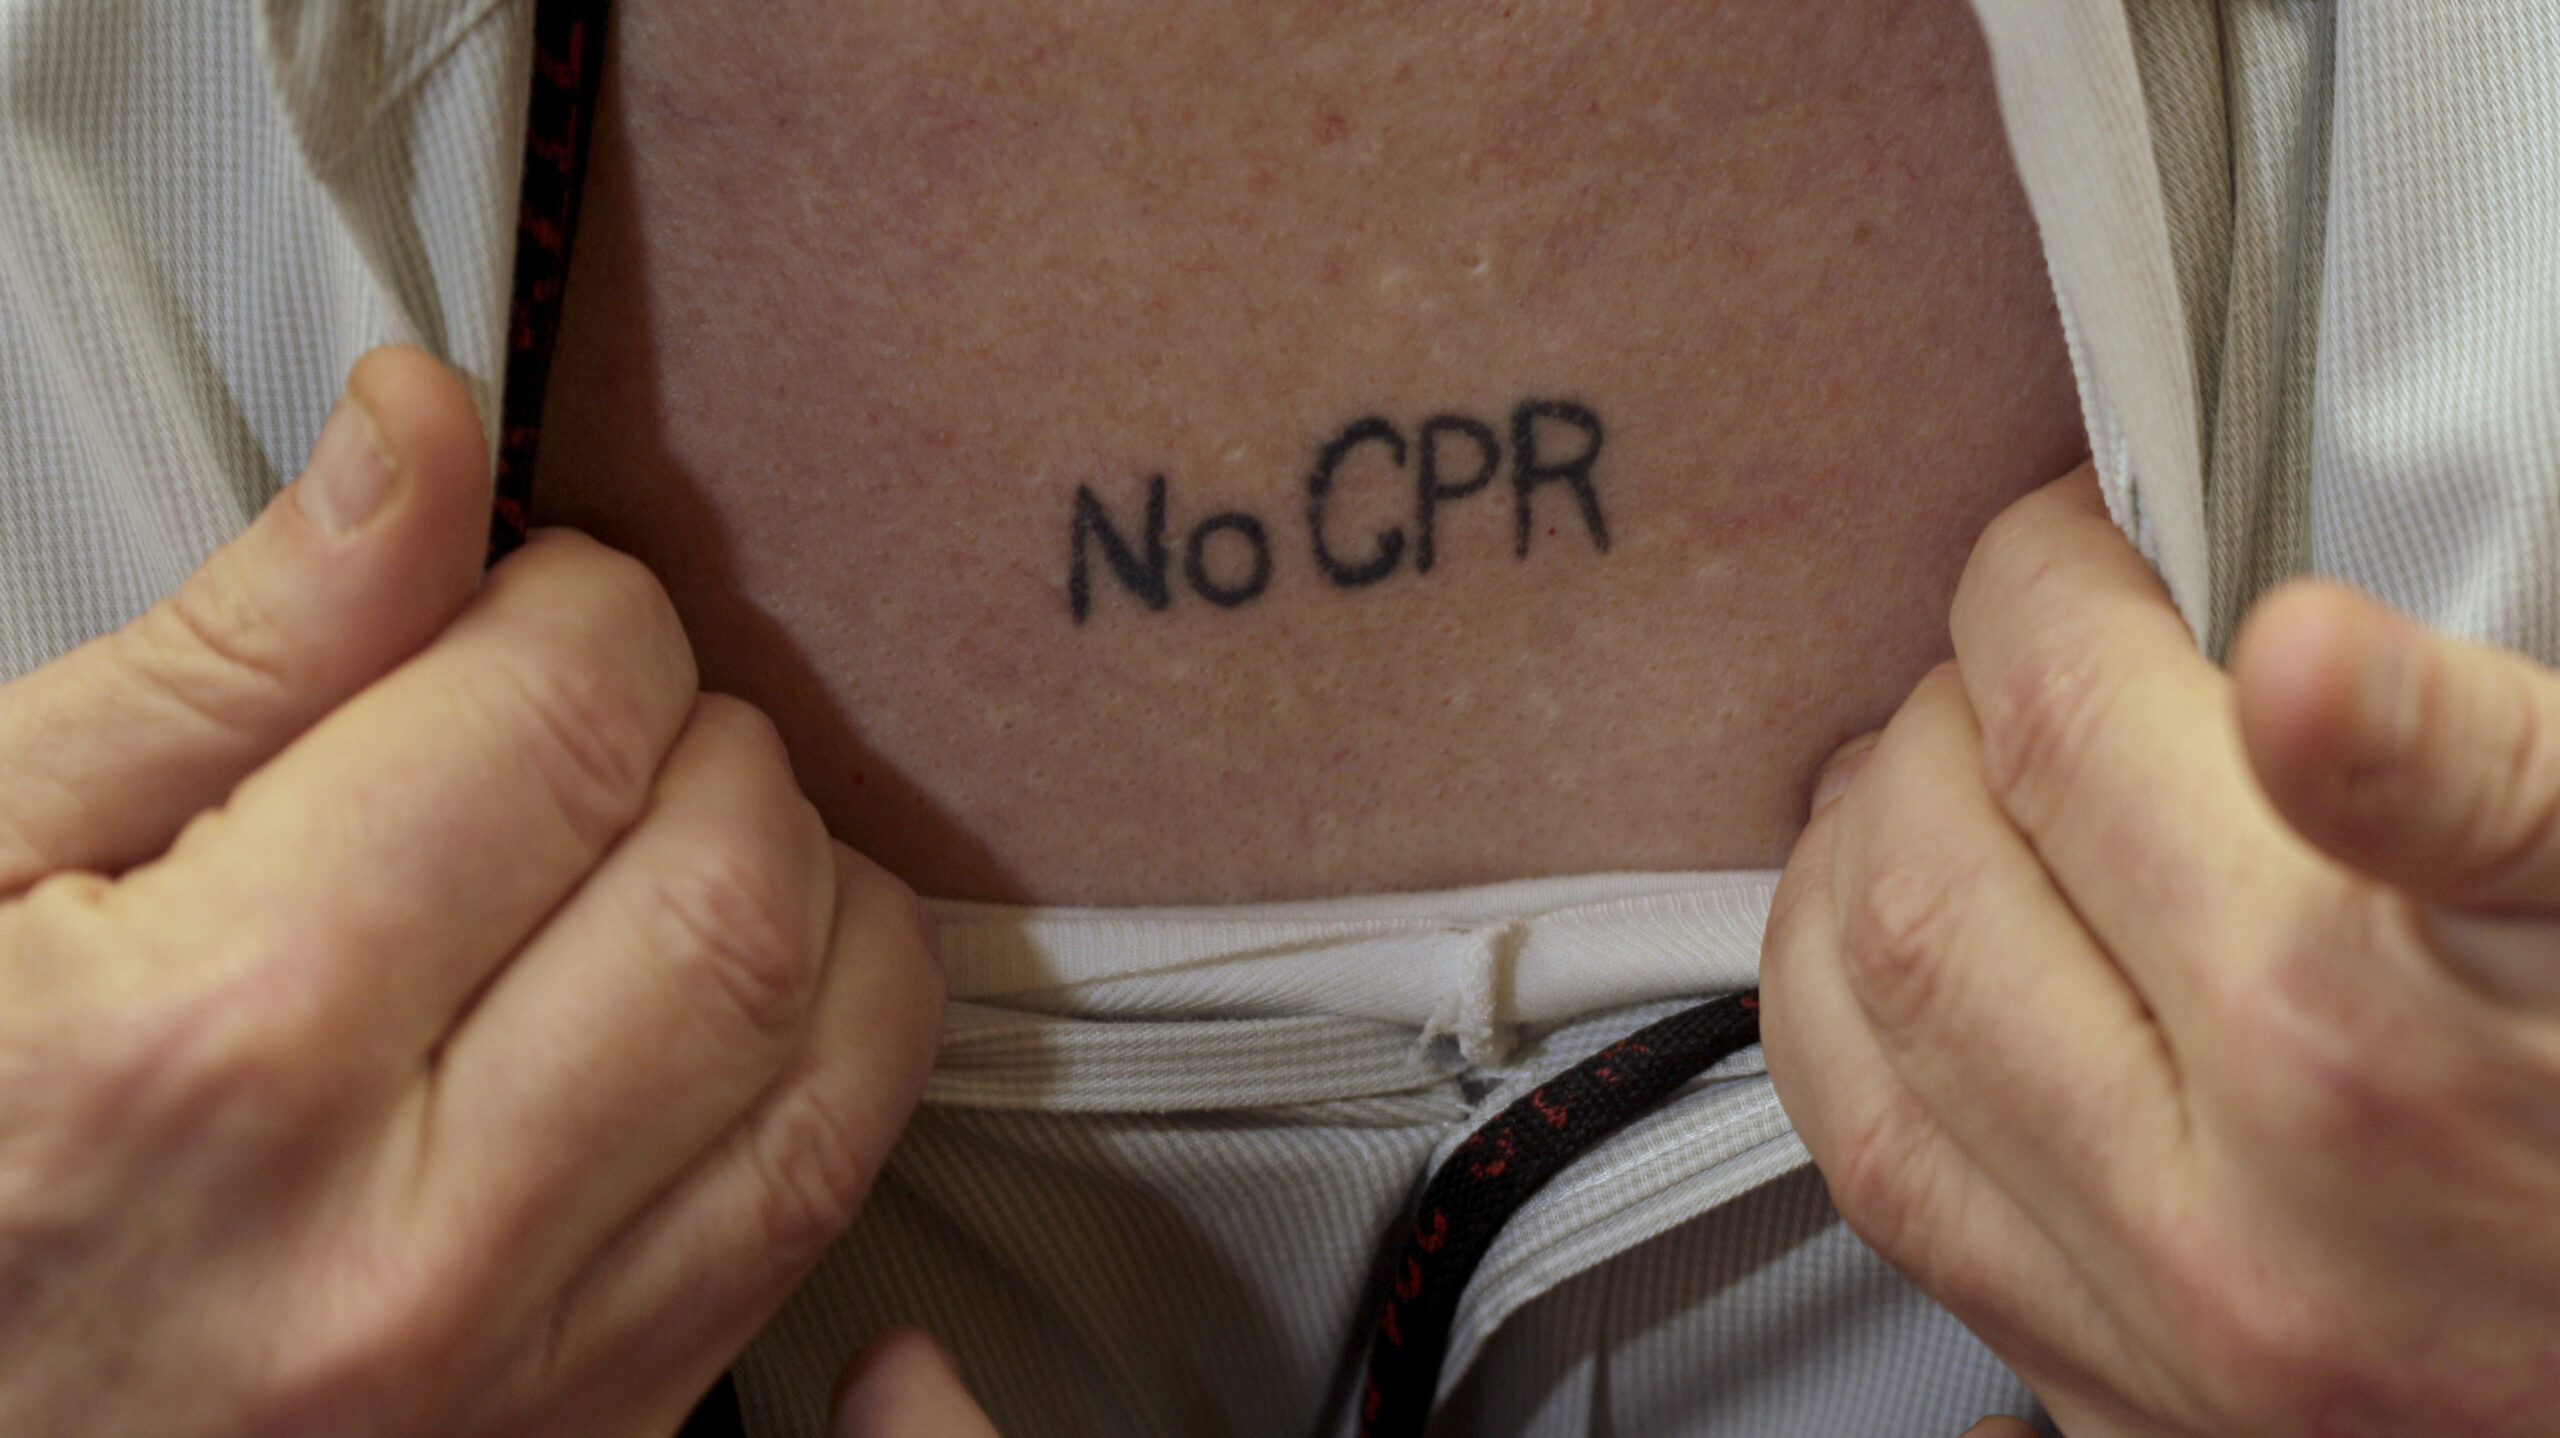 CPR can be lifesaving for some, futile for others. Here’s what makes the difference